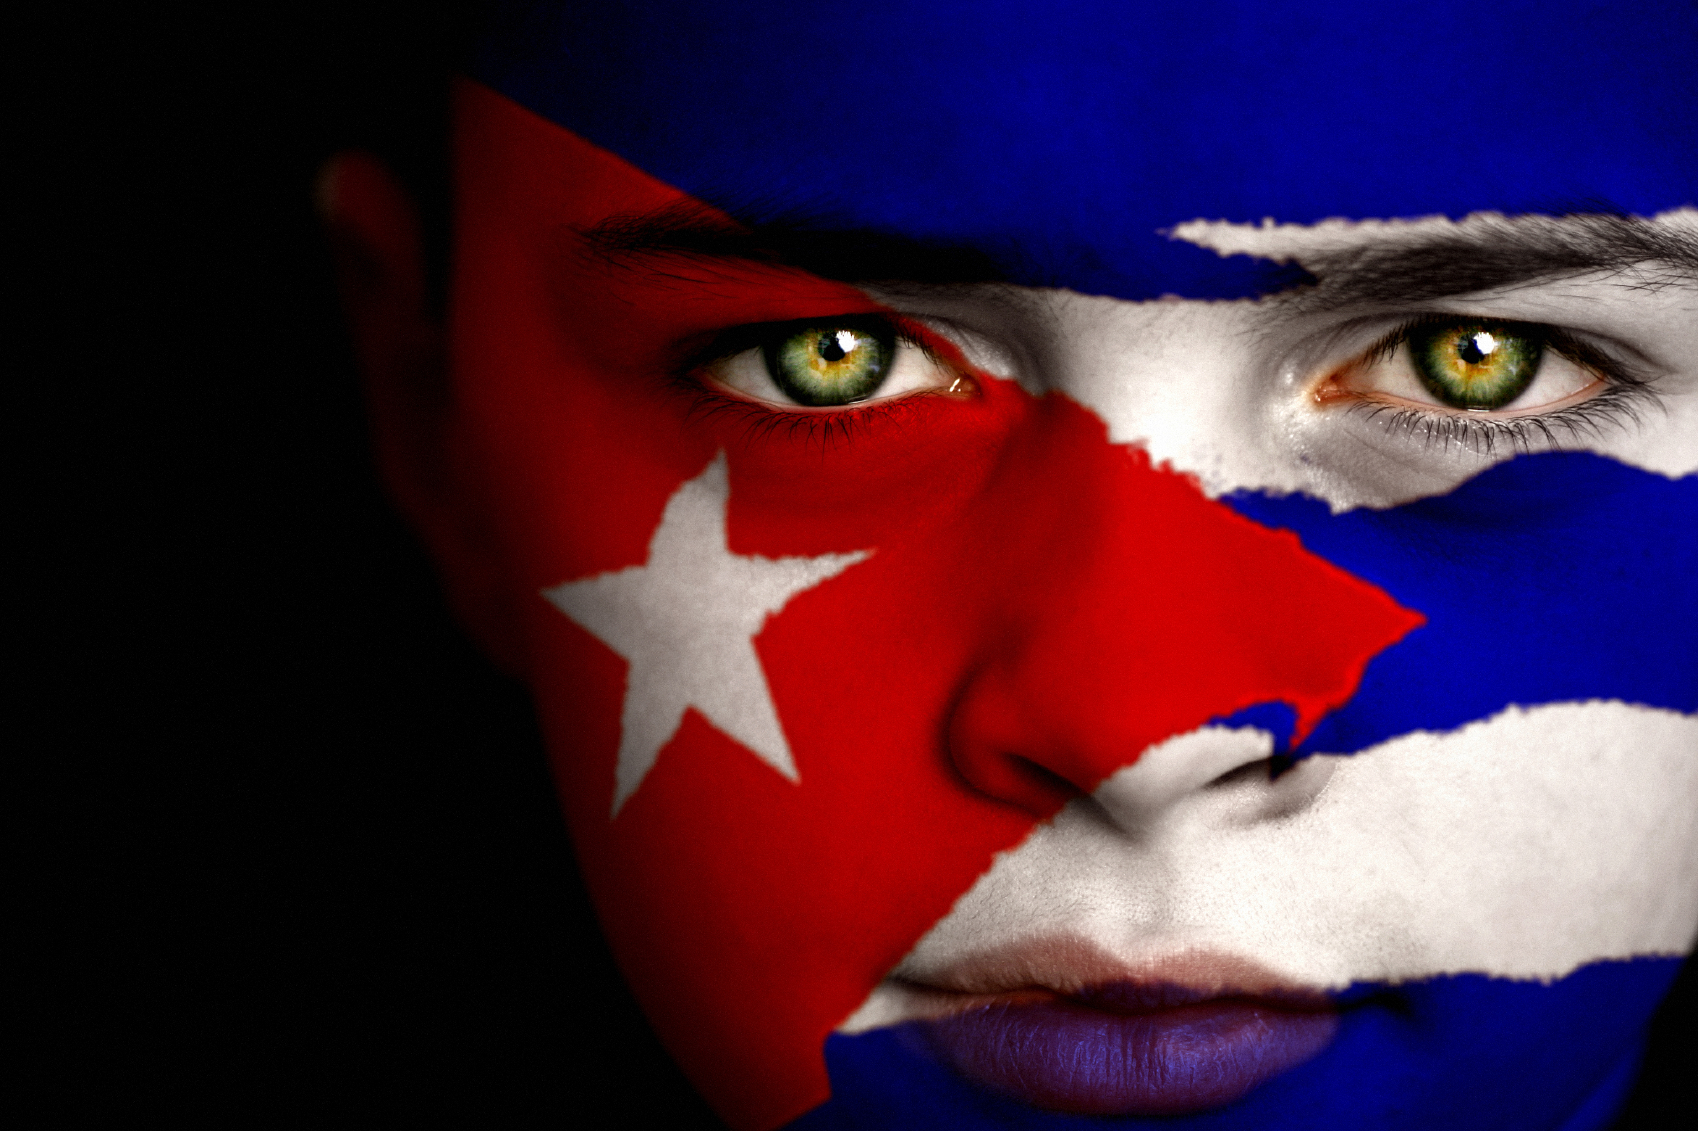 Portrait of a boy with the flag of cuba painted on his face.